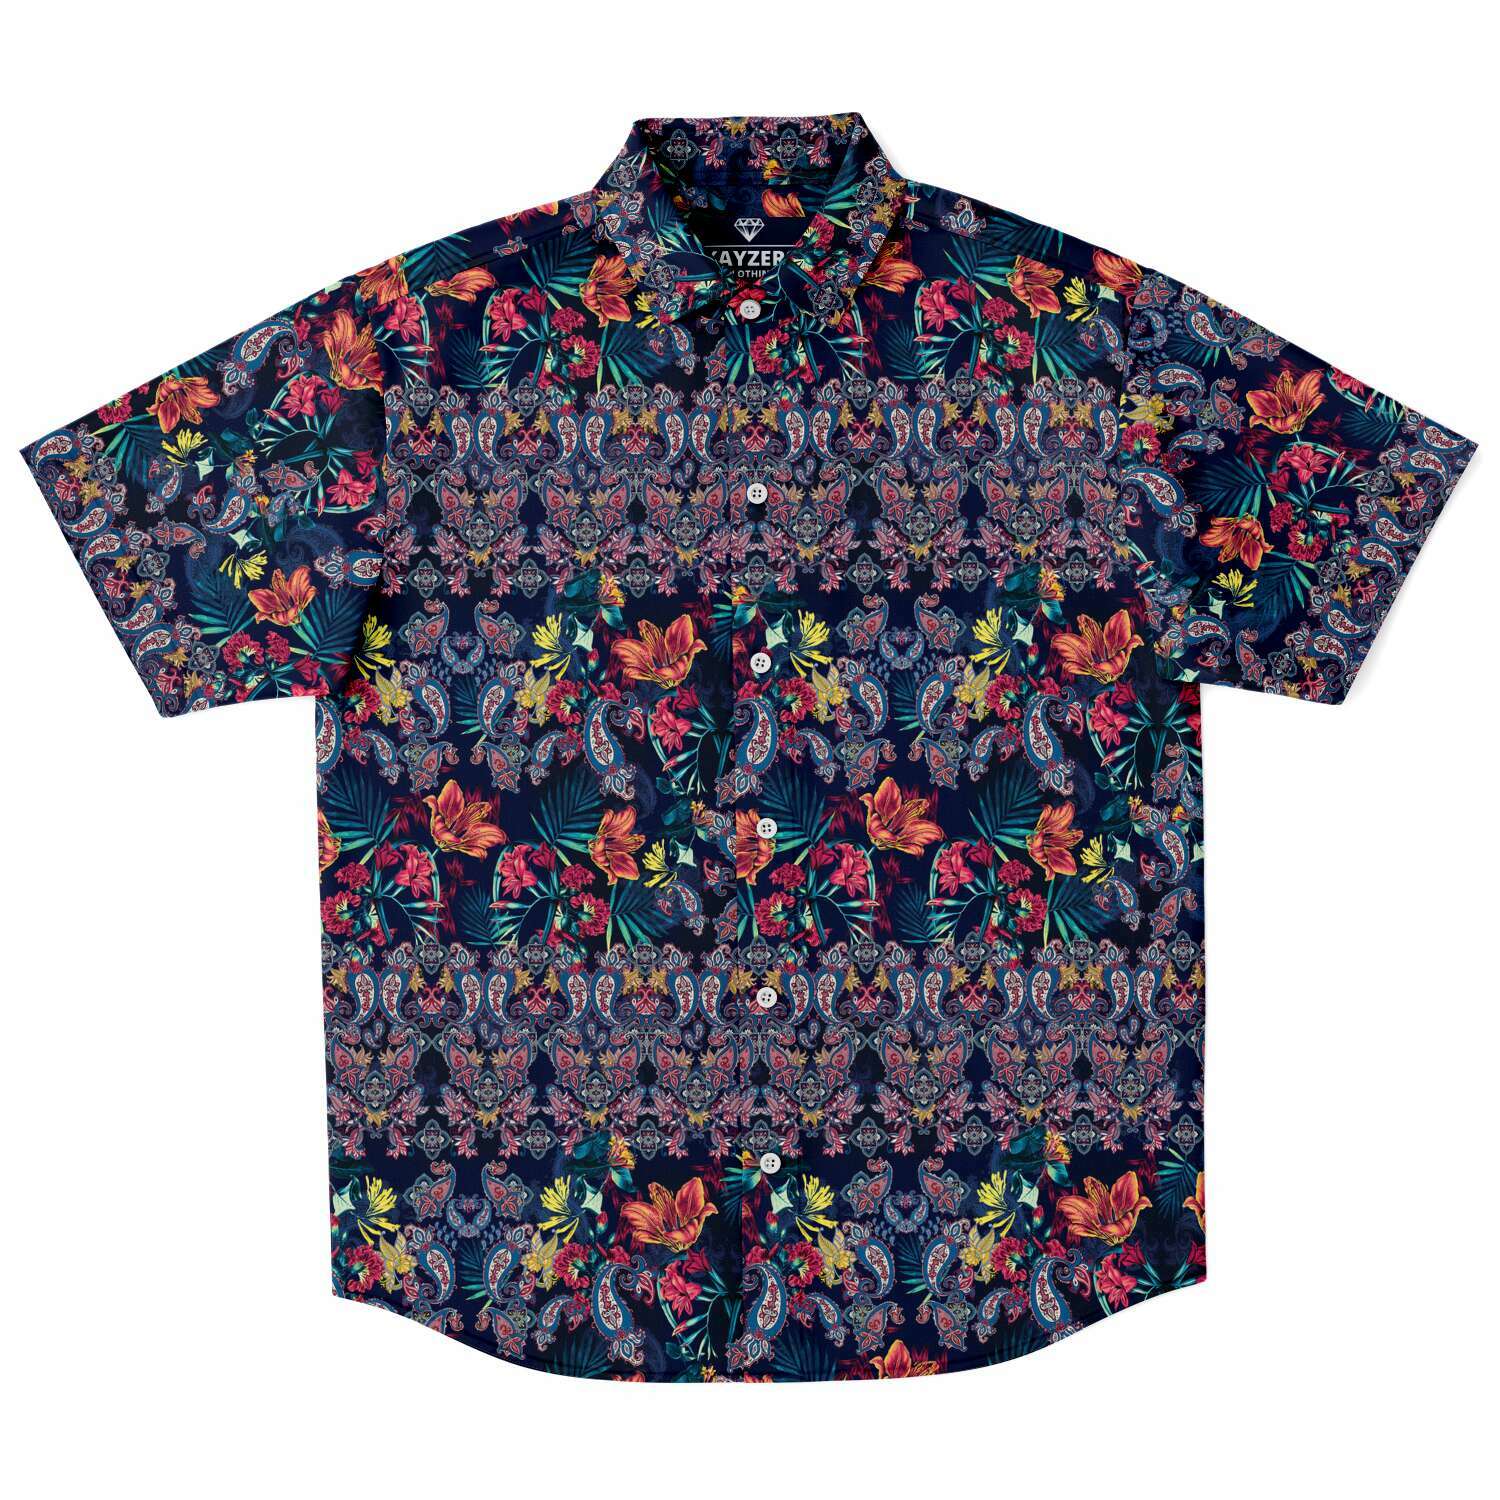 Floral Paisley Button Down Shirt - kayzers